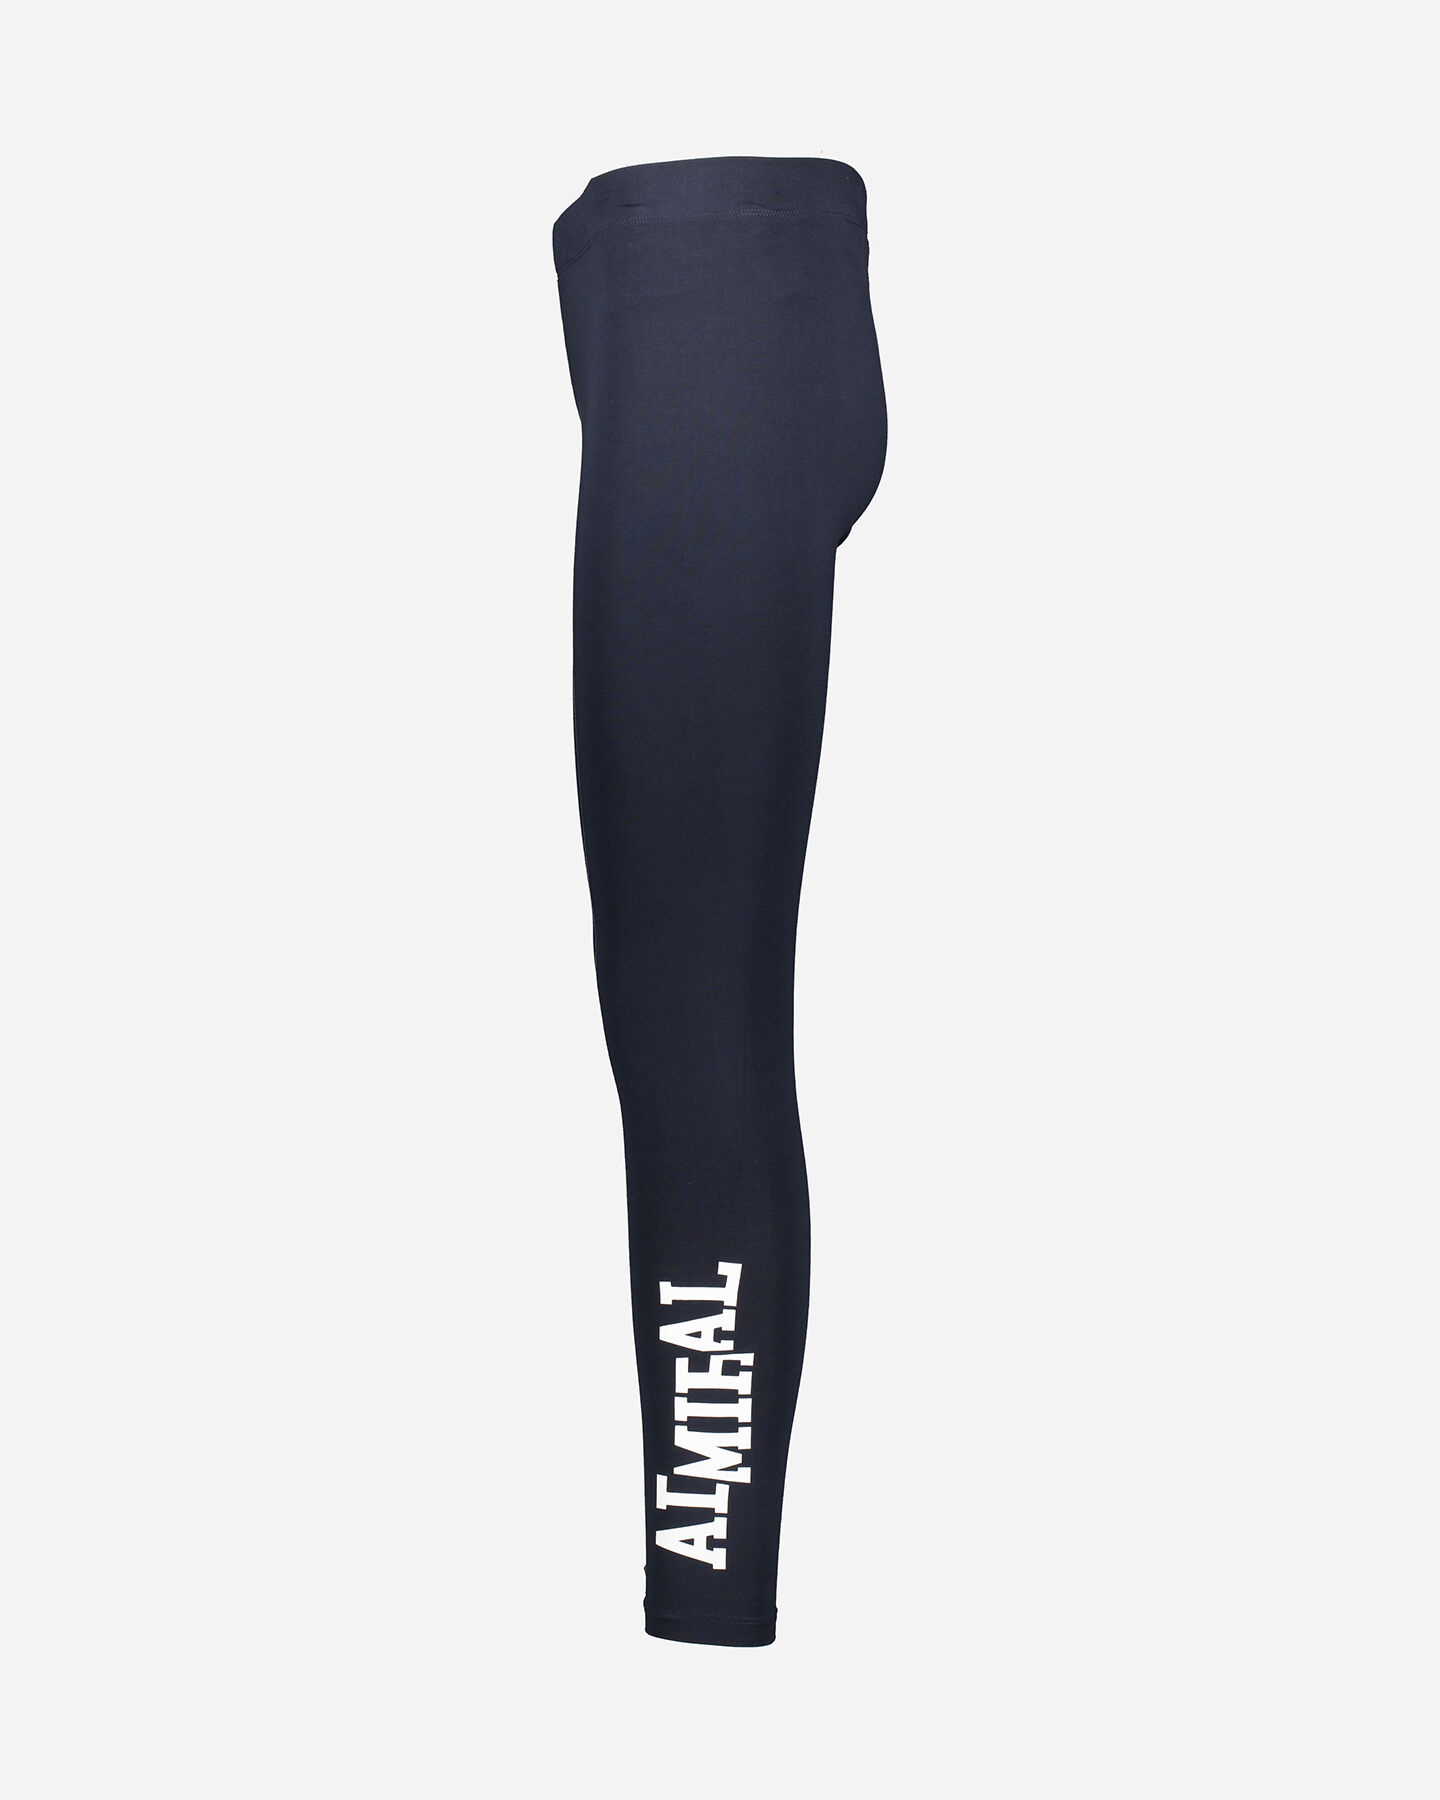  Leggings ADMIRAL JSTRETCH NEW LOGO W S4087754|914|XS scatto 1